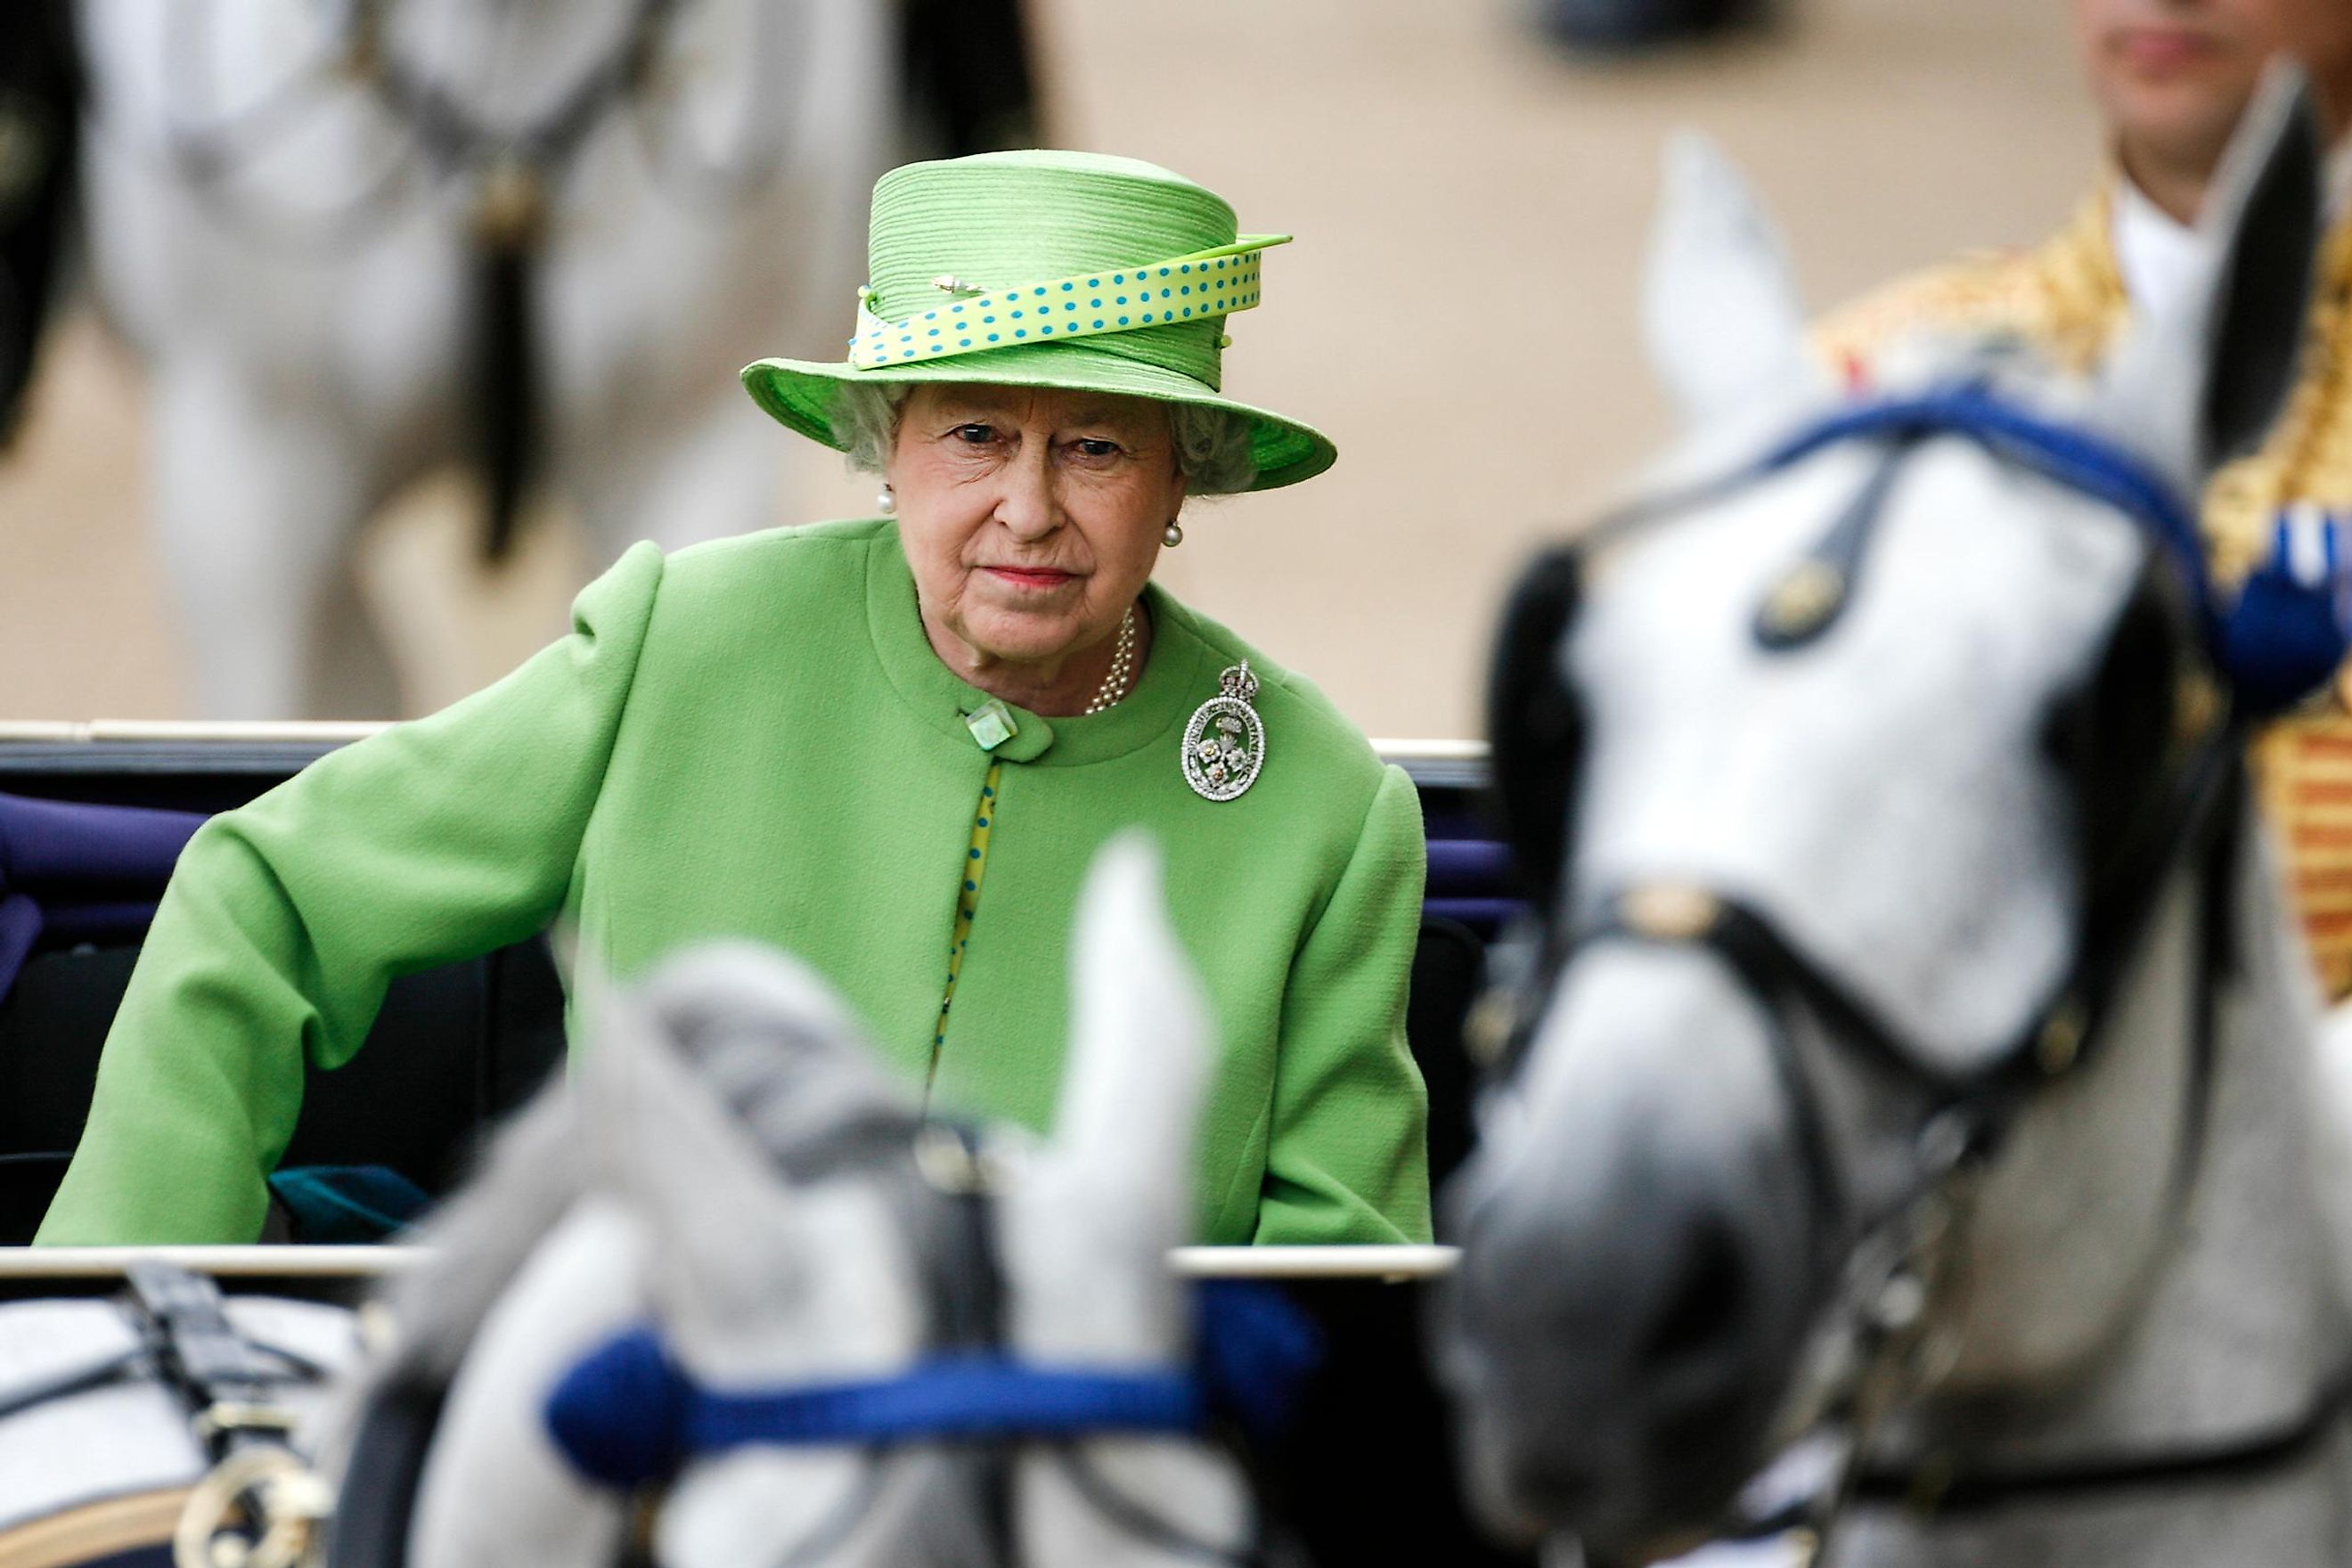 : Her Royal Highness Queen Elizabeth II travels by carriage during the Trooping the Colour ceremony. Editorial credit: Alessia Pierdomenico / Shutterstock.com